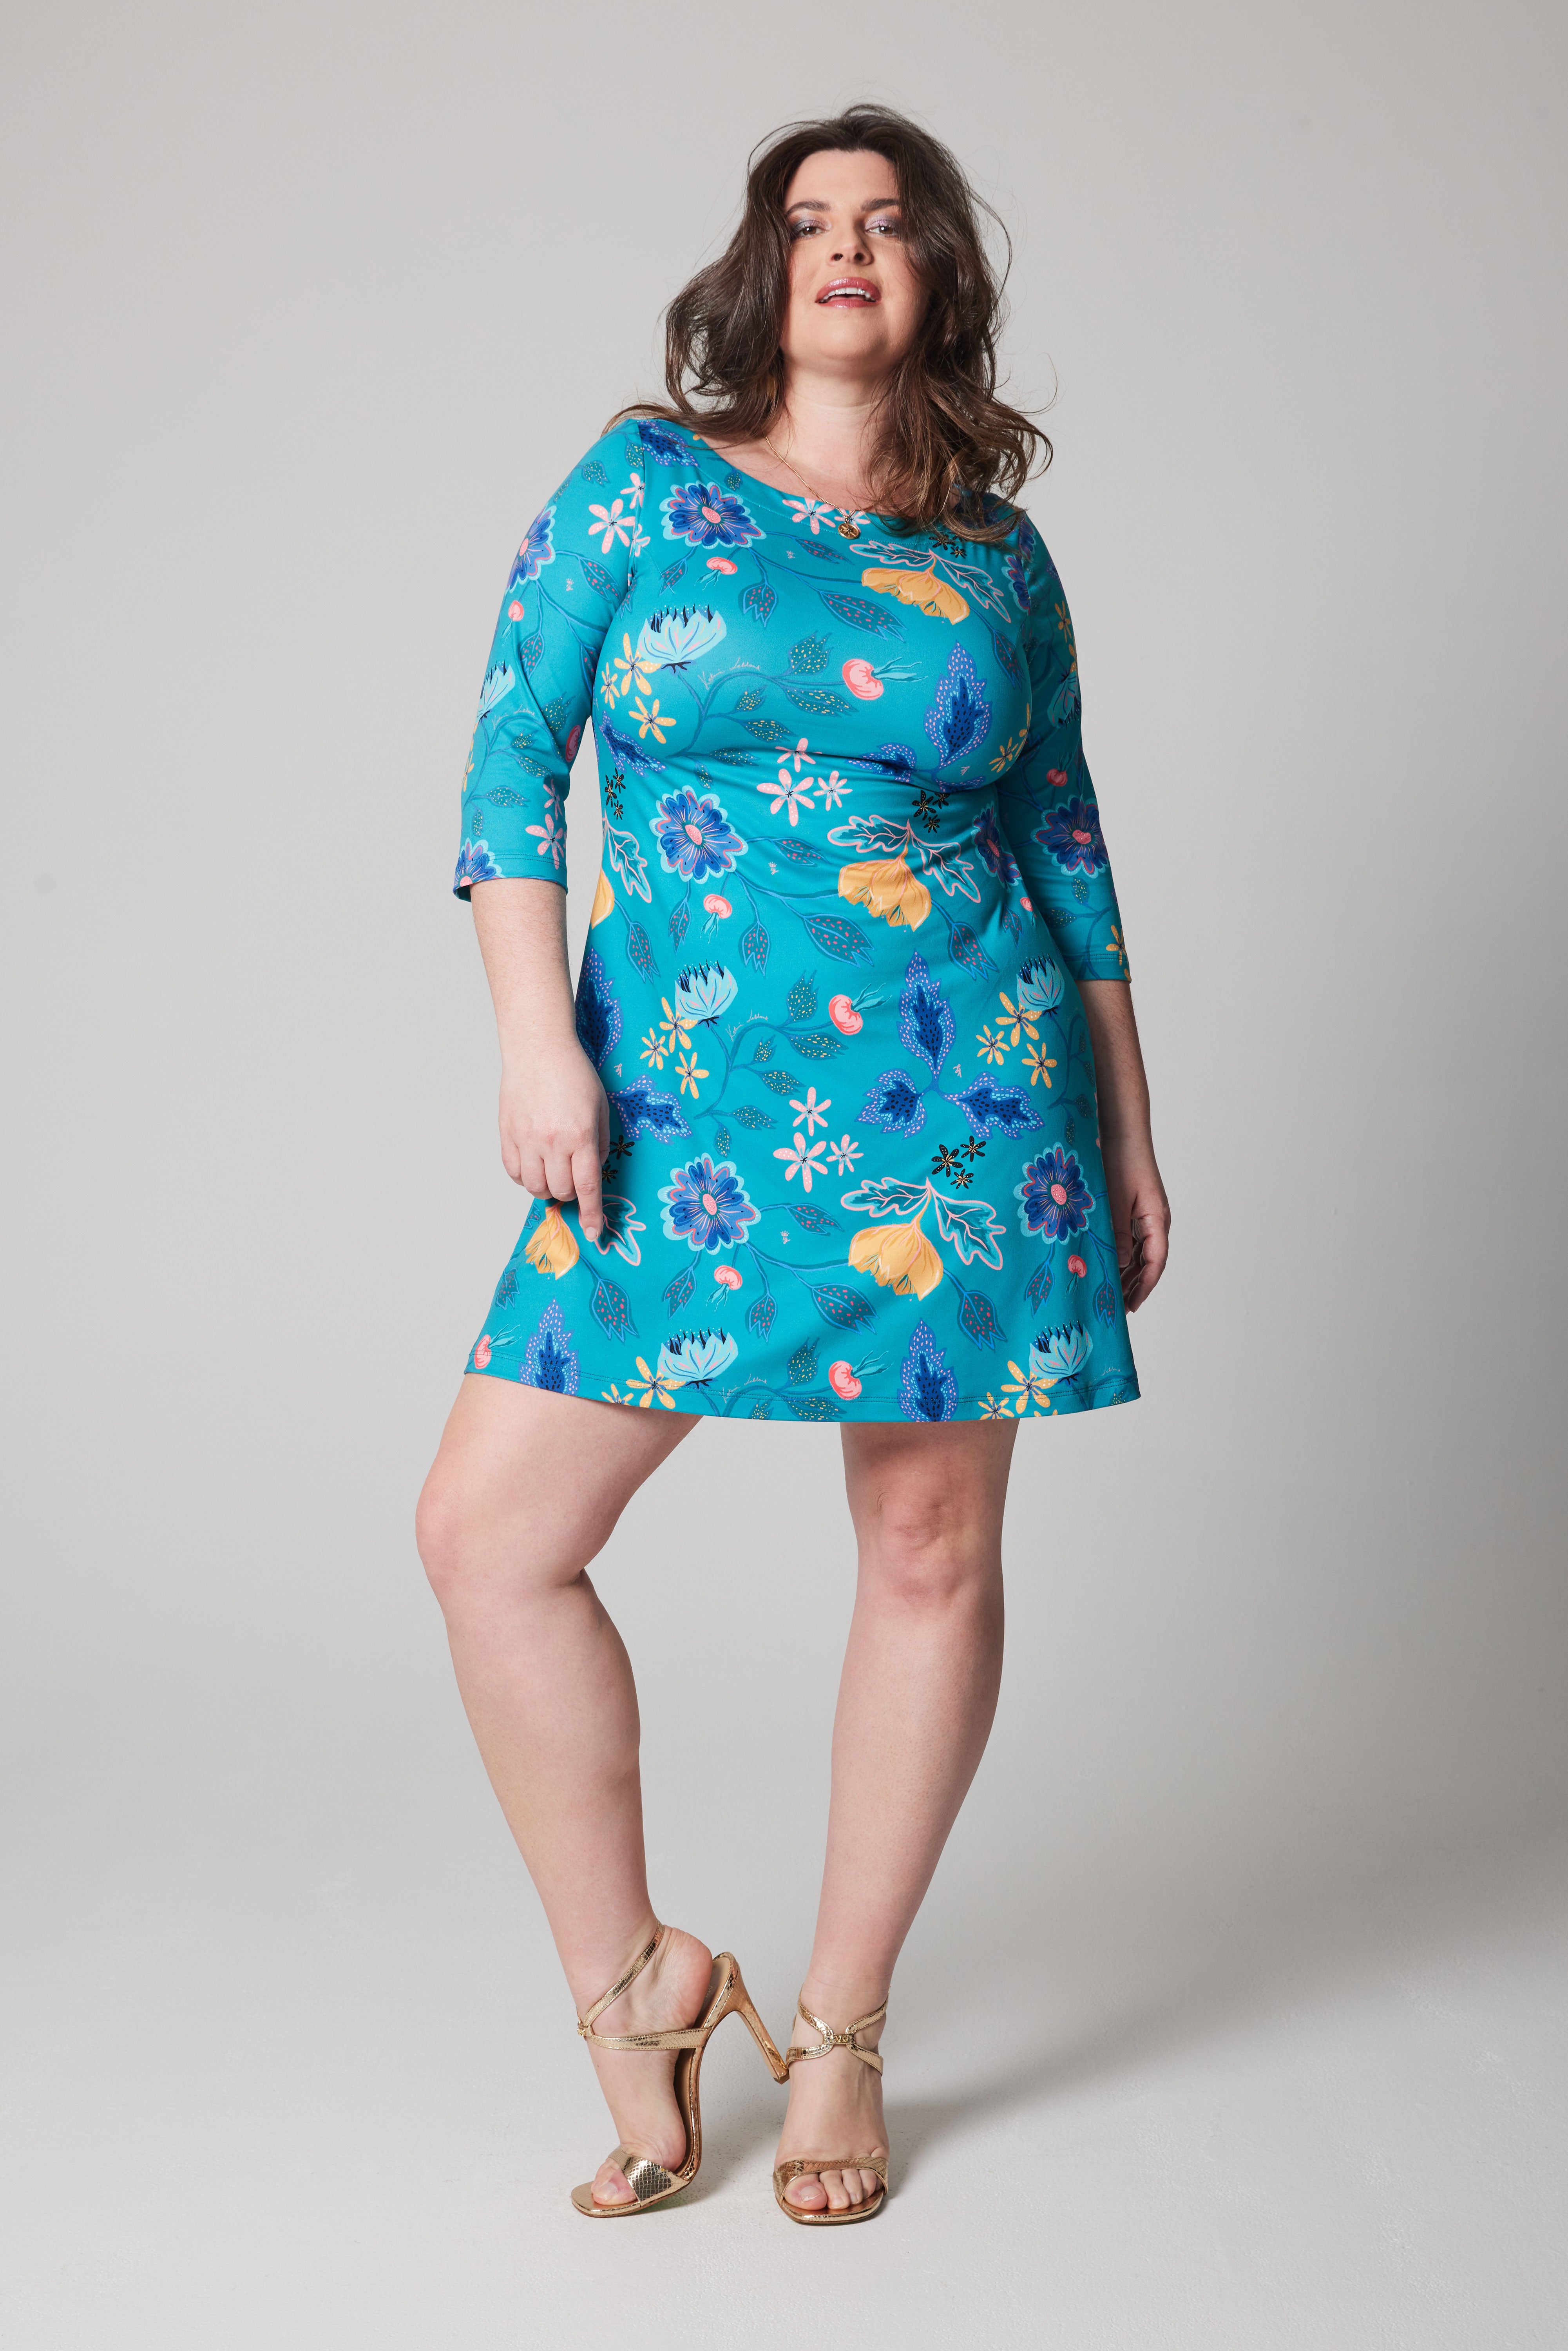 A-Line Dress - Rosehip Turquoise